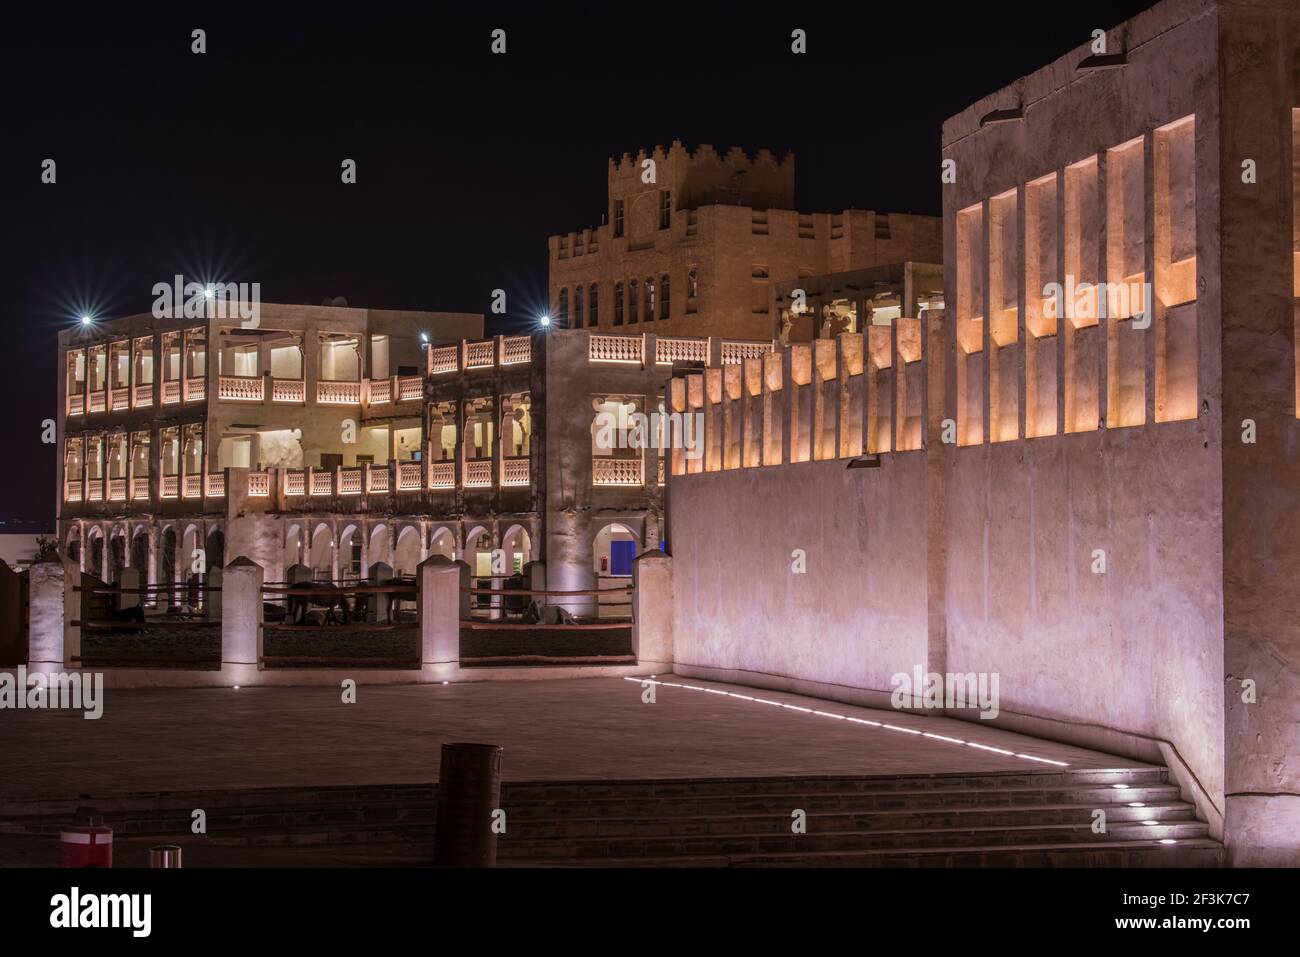 Doha,Qatar- March 04,2022 : Night views of the traditional Arabic architecture of market Souk Waqif. Stock Photo